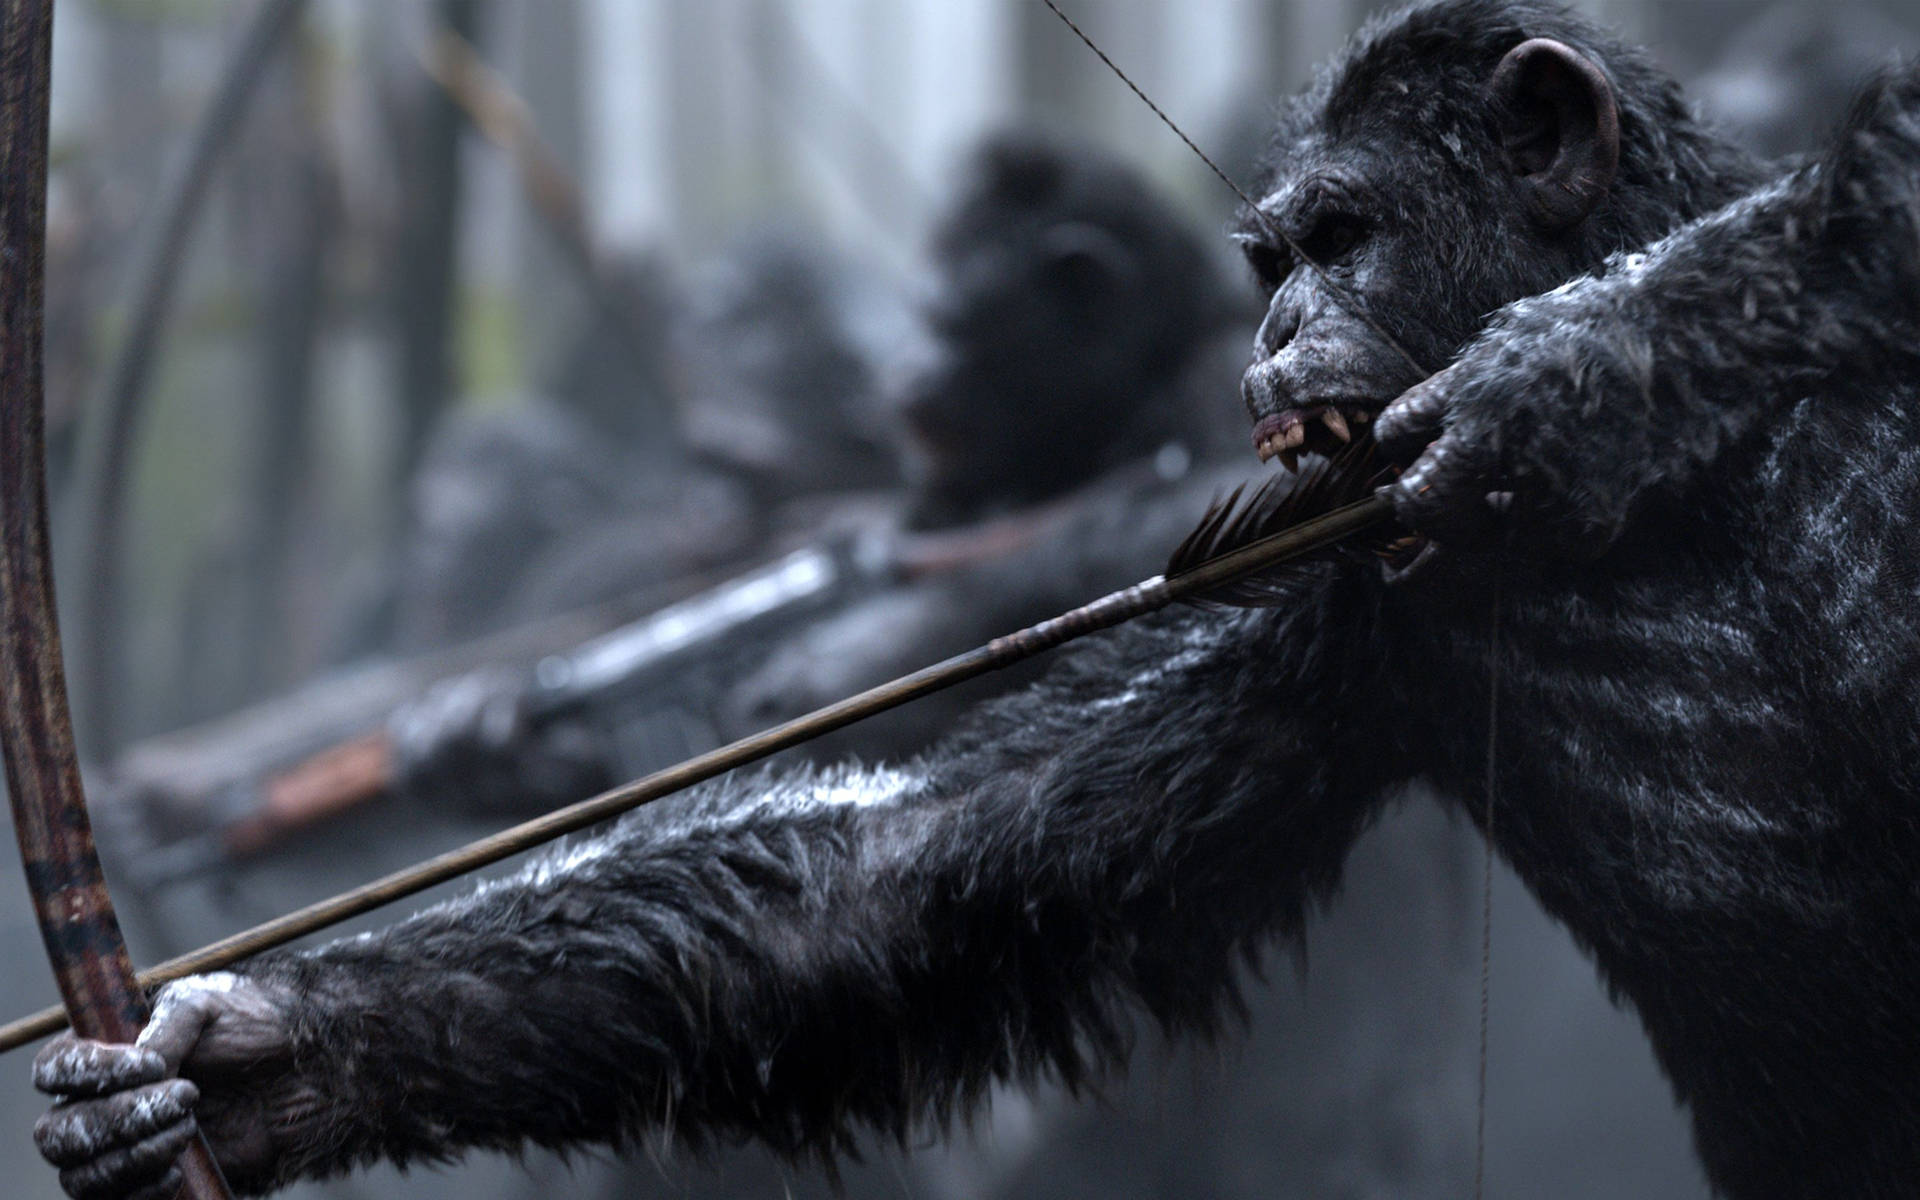 Koba War Of The Planet Of The Apes Wallpaper